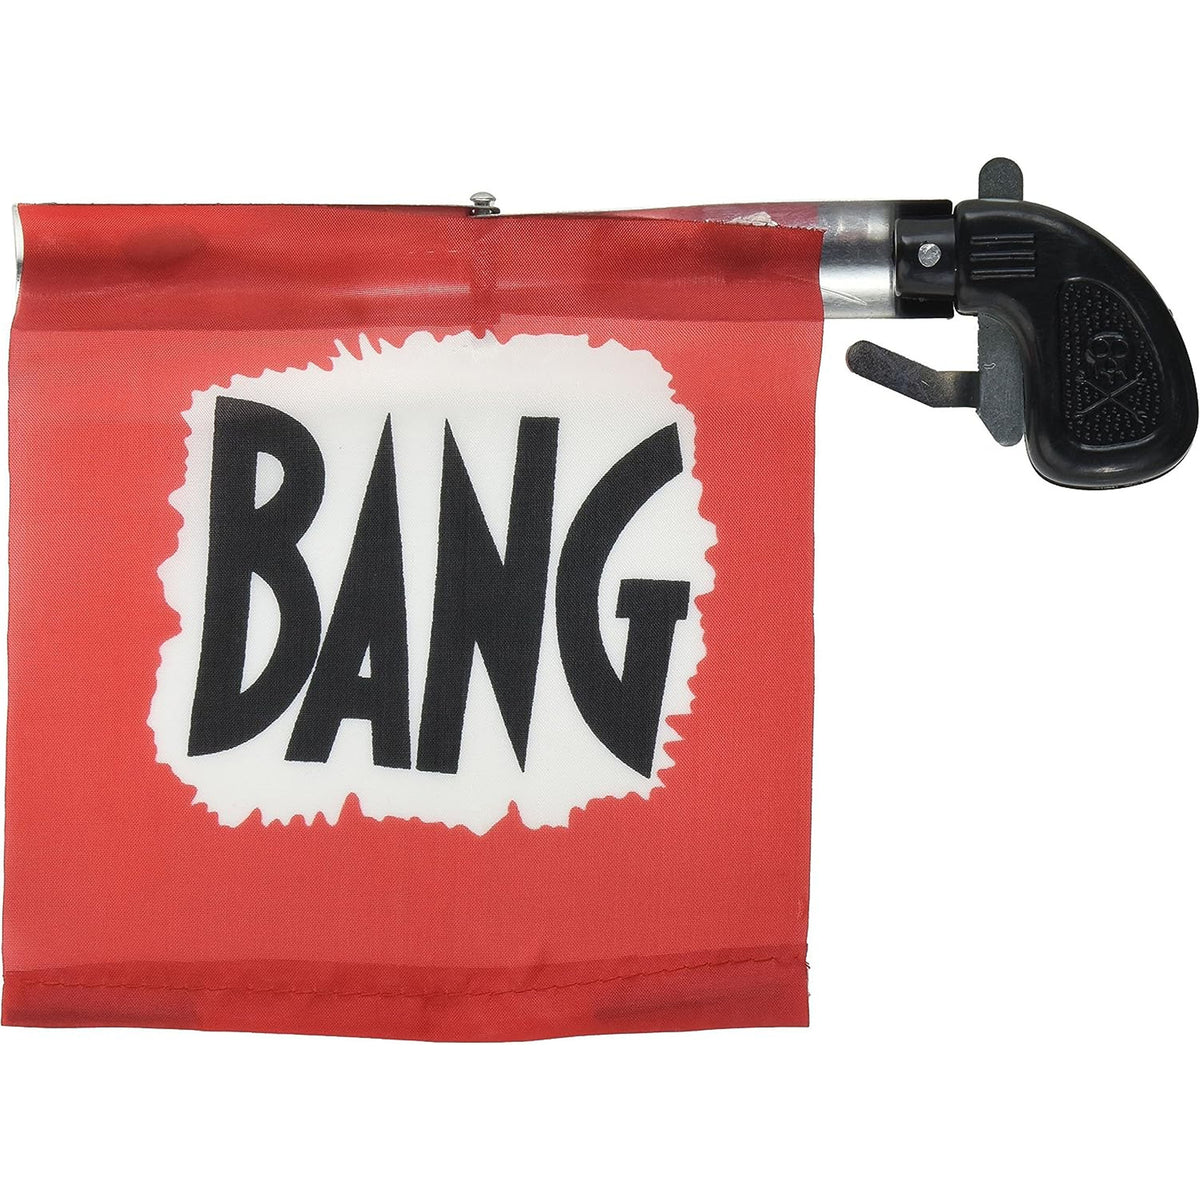 Wholesale New 5-Inch Toy Pistol Gun with Bang Flag - Classic Fun and Safe Play (Sold By Piece)